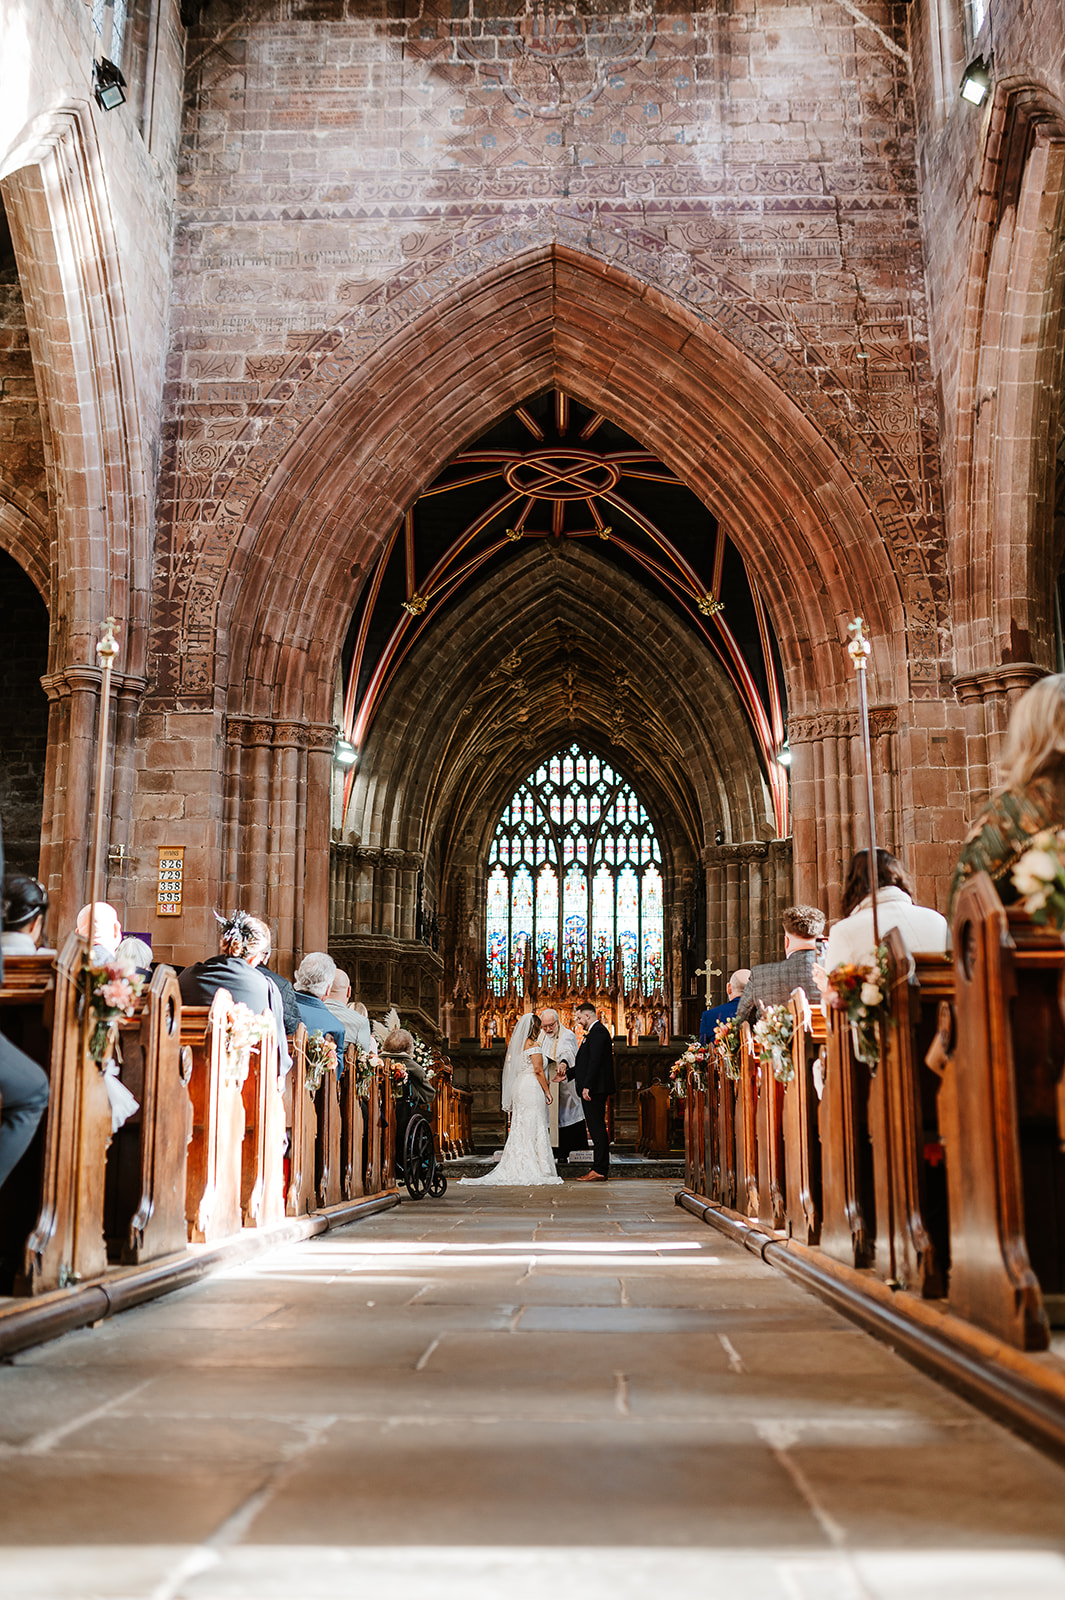 View down aisle in church during ceremony